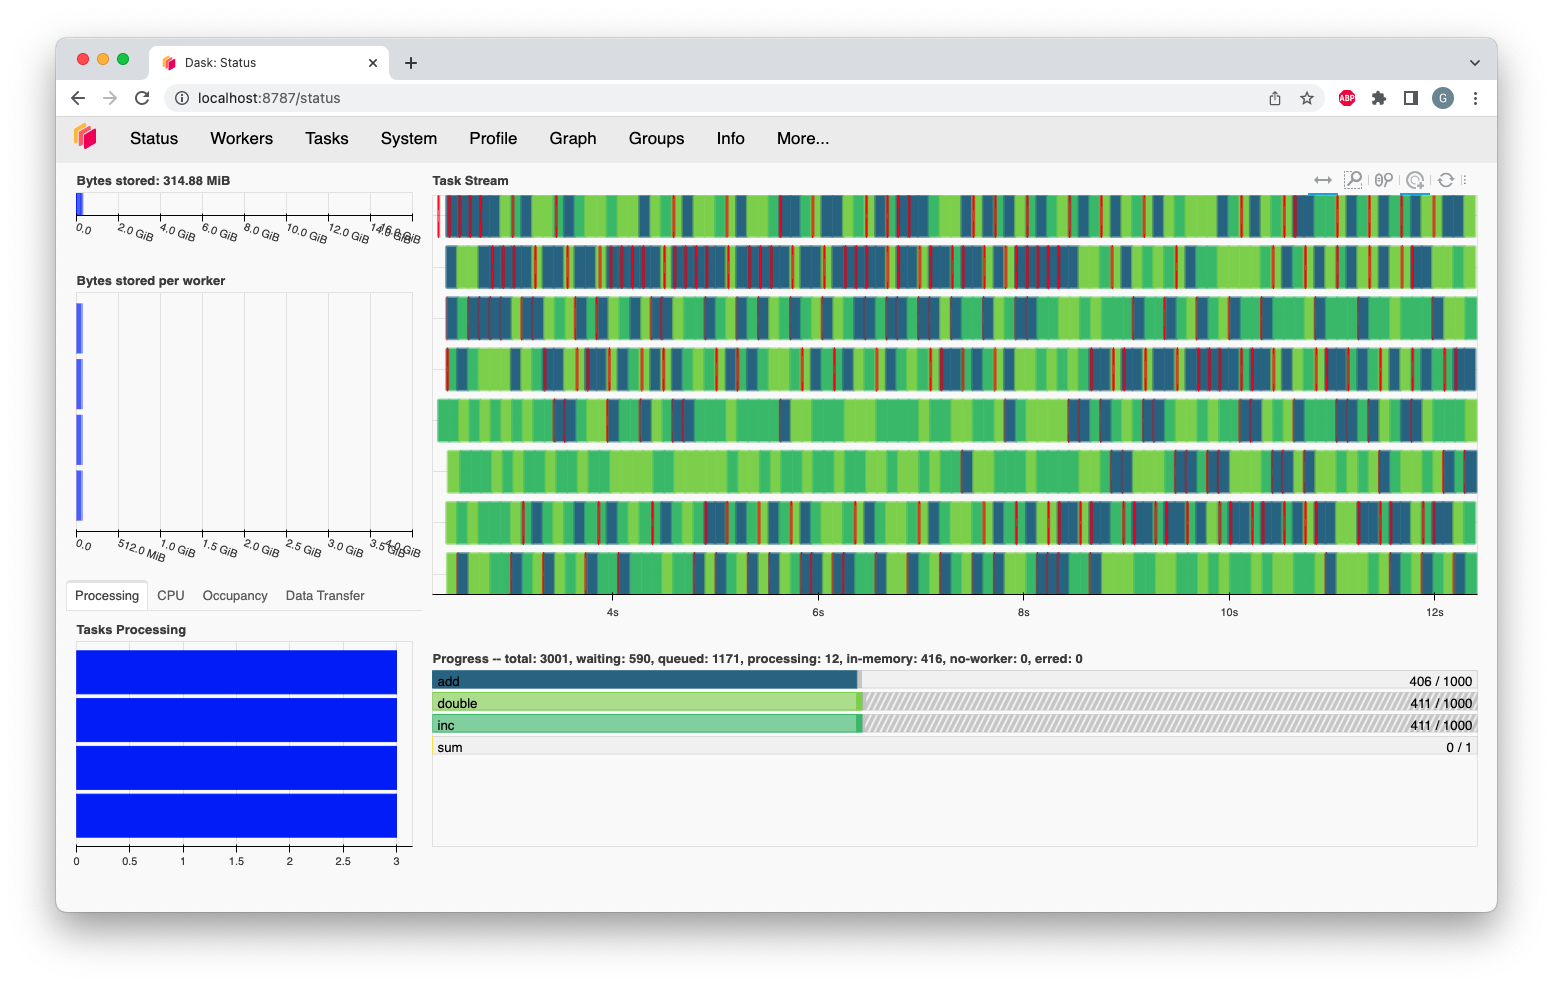 Main dashboard with five panes arranged into two columns. In the left column there are three bar charts. The top two show total bytes stored and bytes per worker. The bottom has three tabs to toggle between task processing, CPU utilization, and occupancy. In the right column, there are two bar charts with corresponding colors showing task activity over time, referred to as task stream and progress.